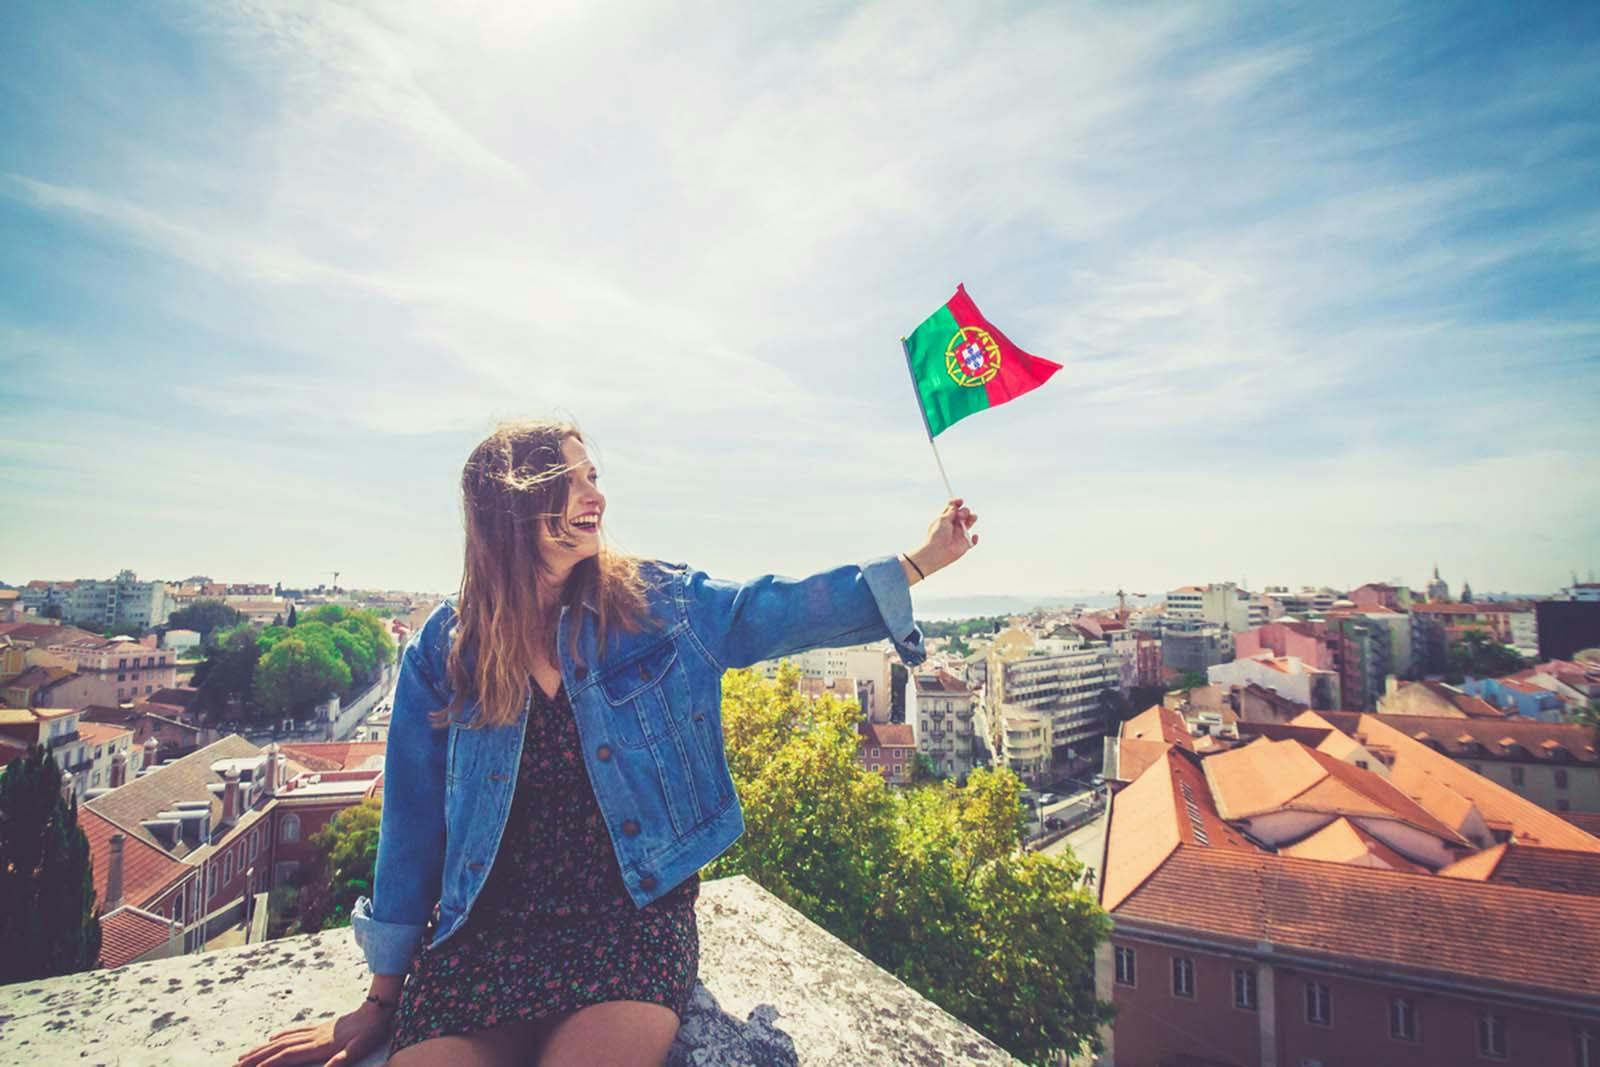 Woman holding up a small Portuguese flag during Portugal Day celebrations.